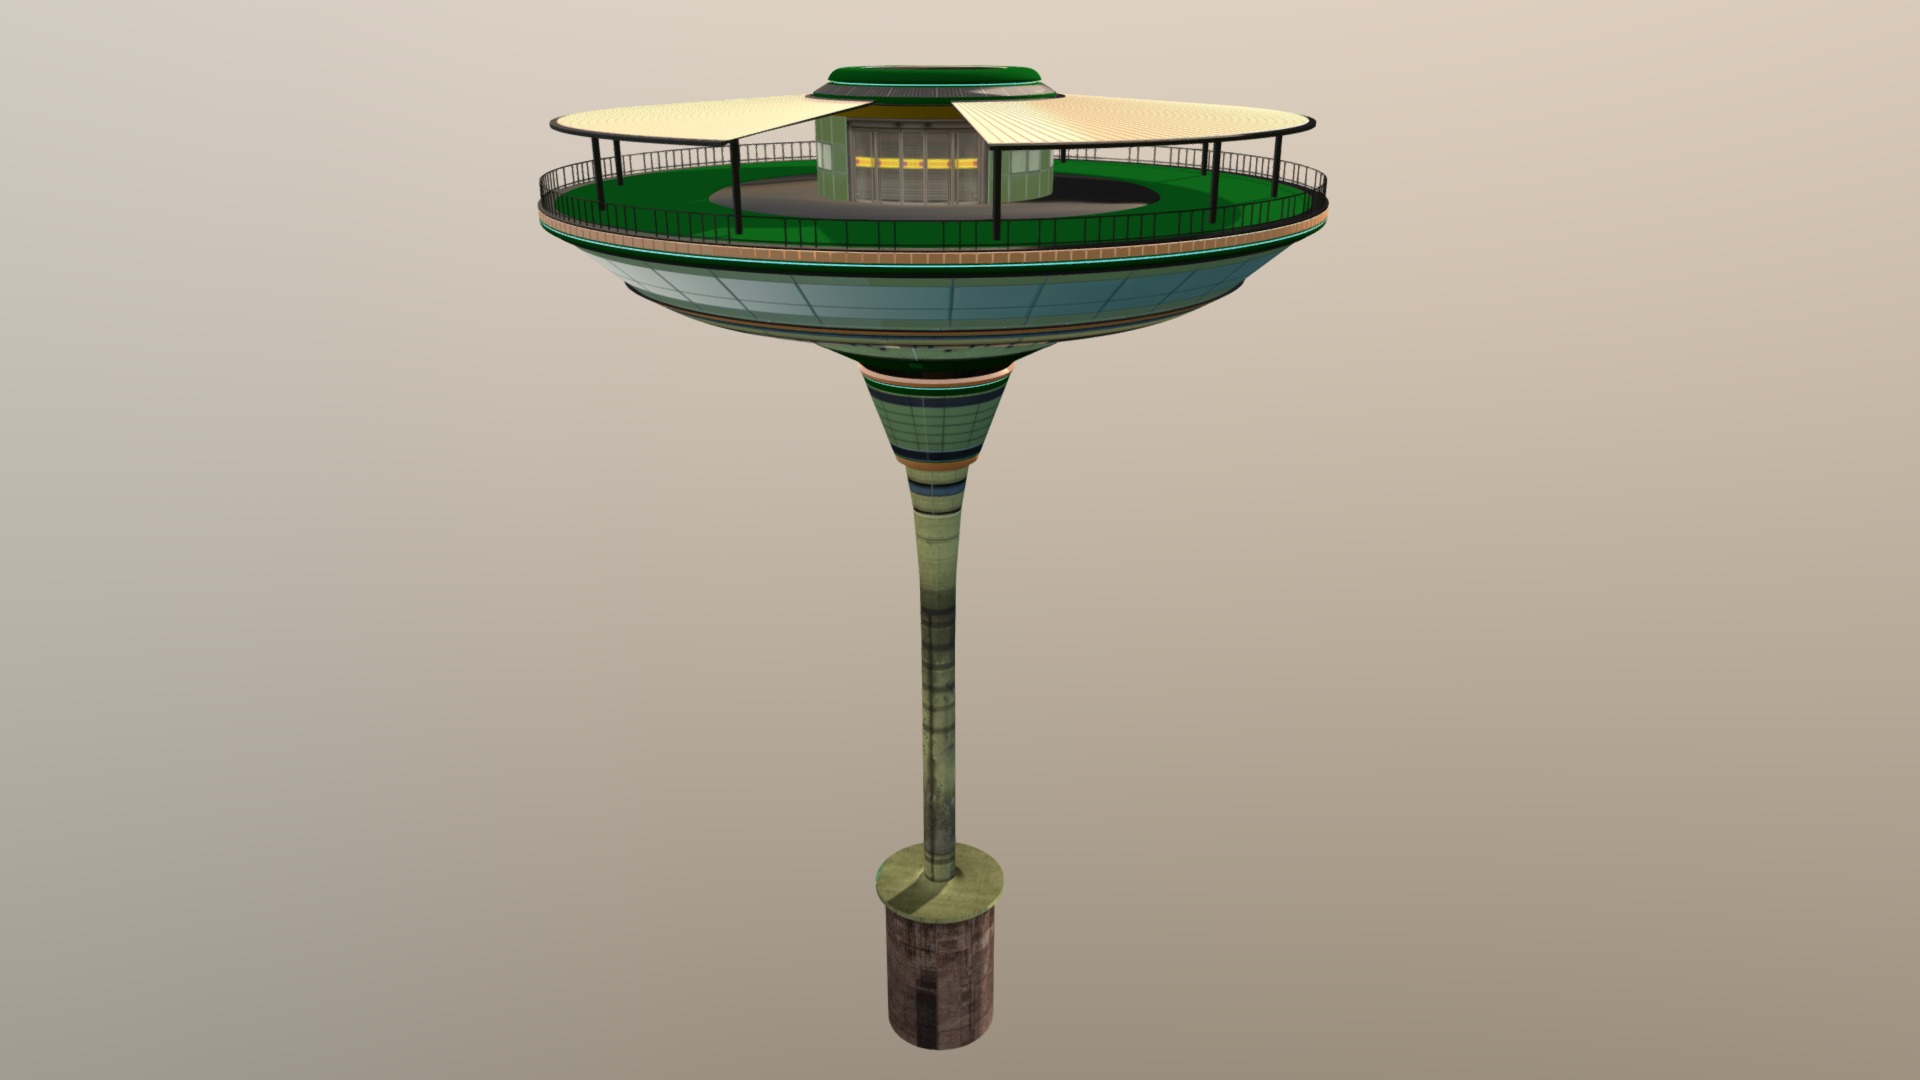 3D model Phoenix Rising ECO Plunger Hose - This is a 3D model of the Phoenix Rising ECO Plunger Hose. The 3D model is about a tall green and yellow tower.